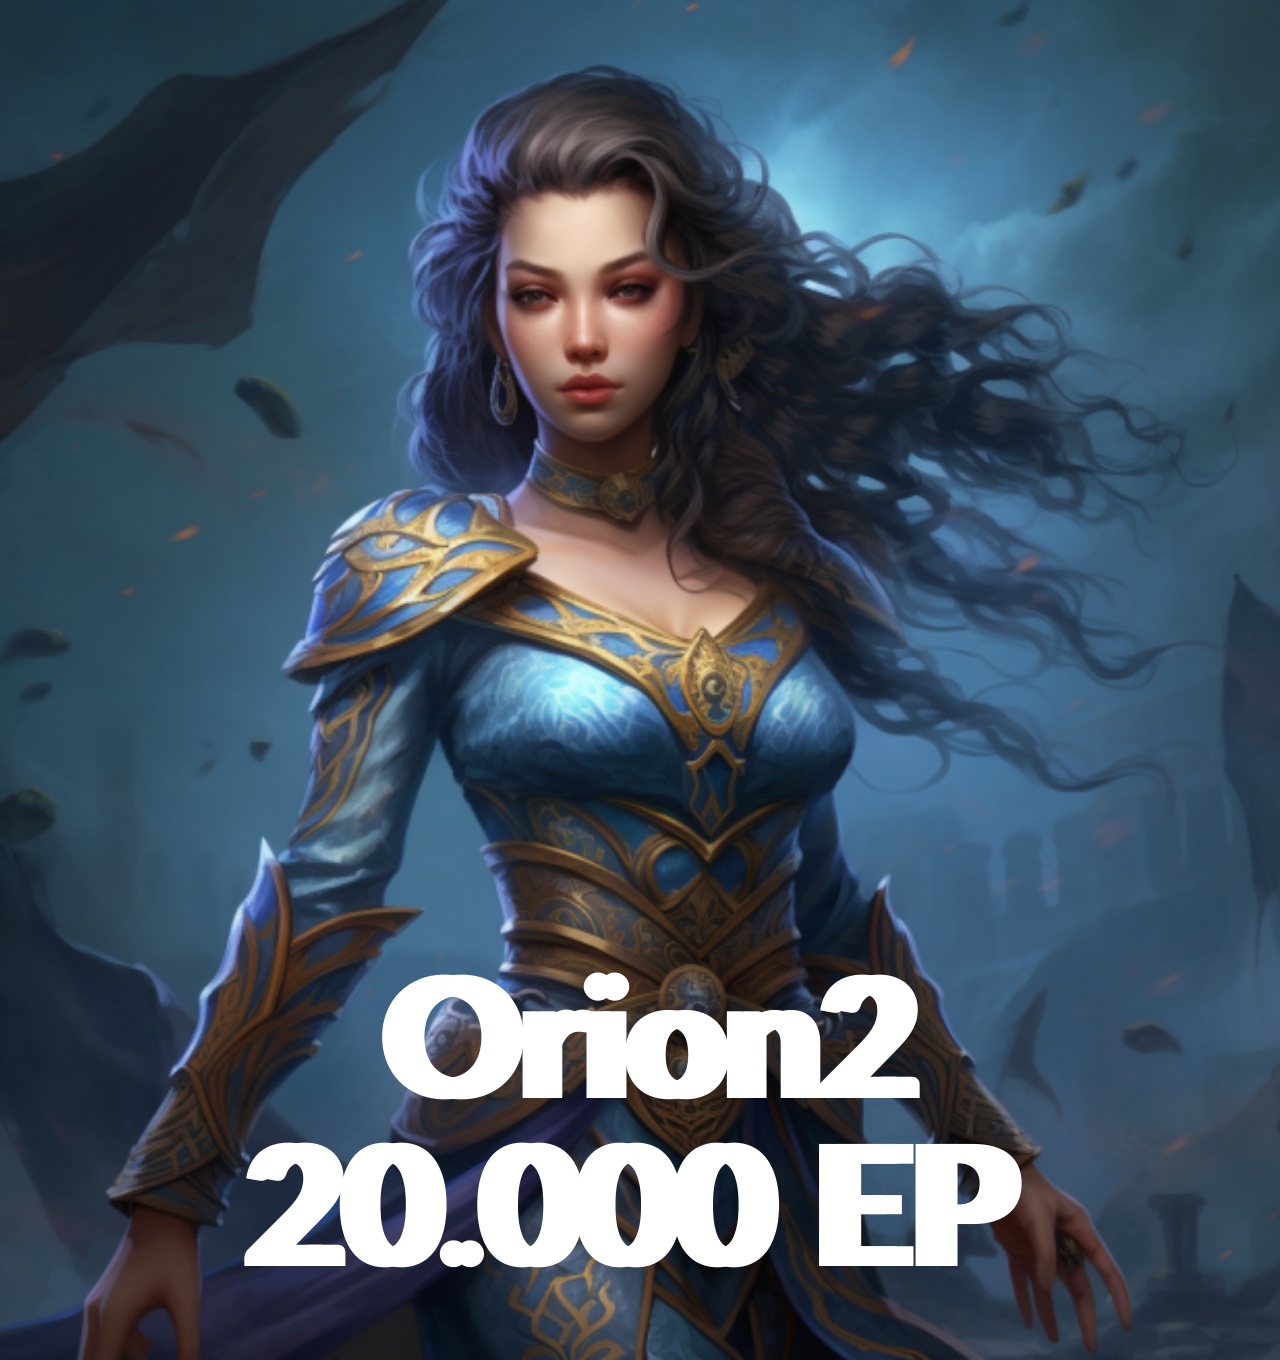 Orion2 20.000 EP